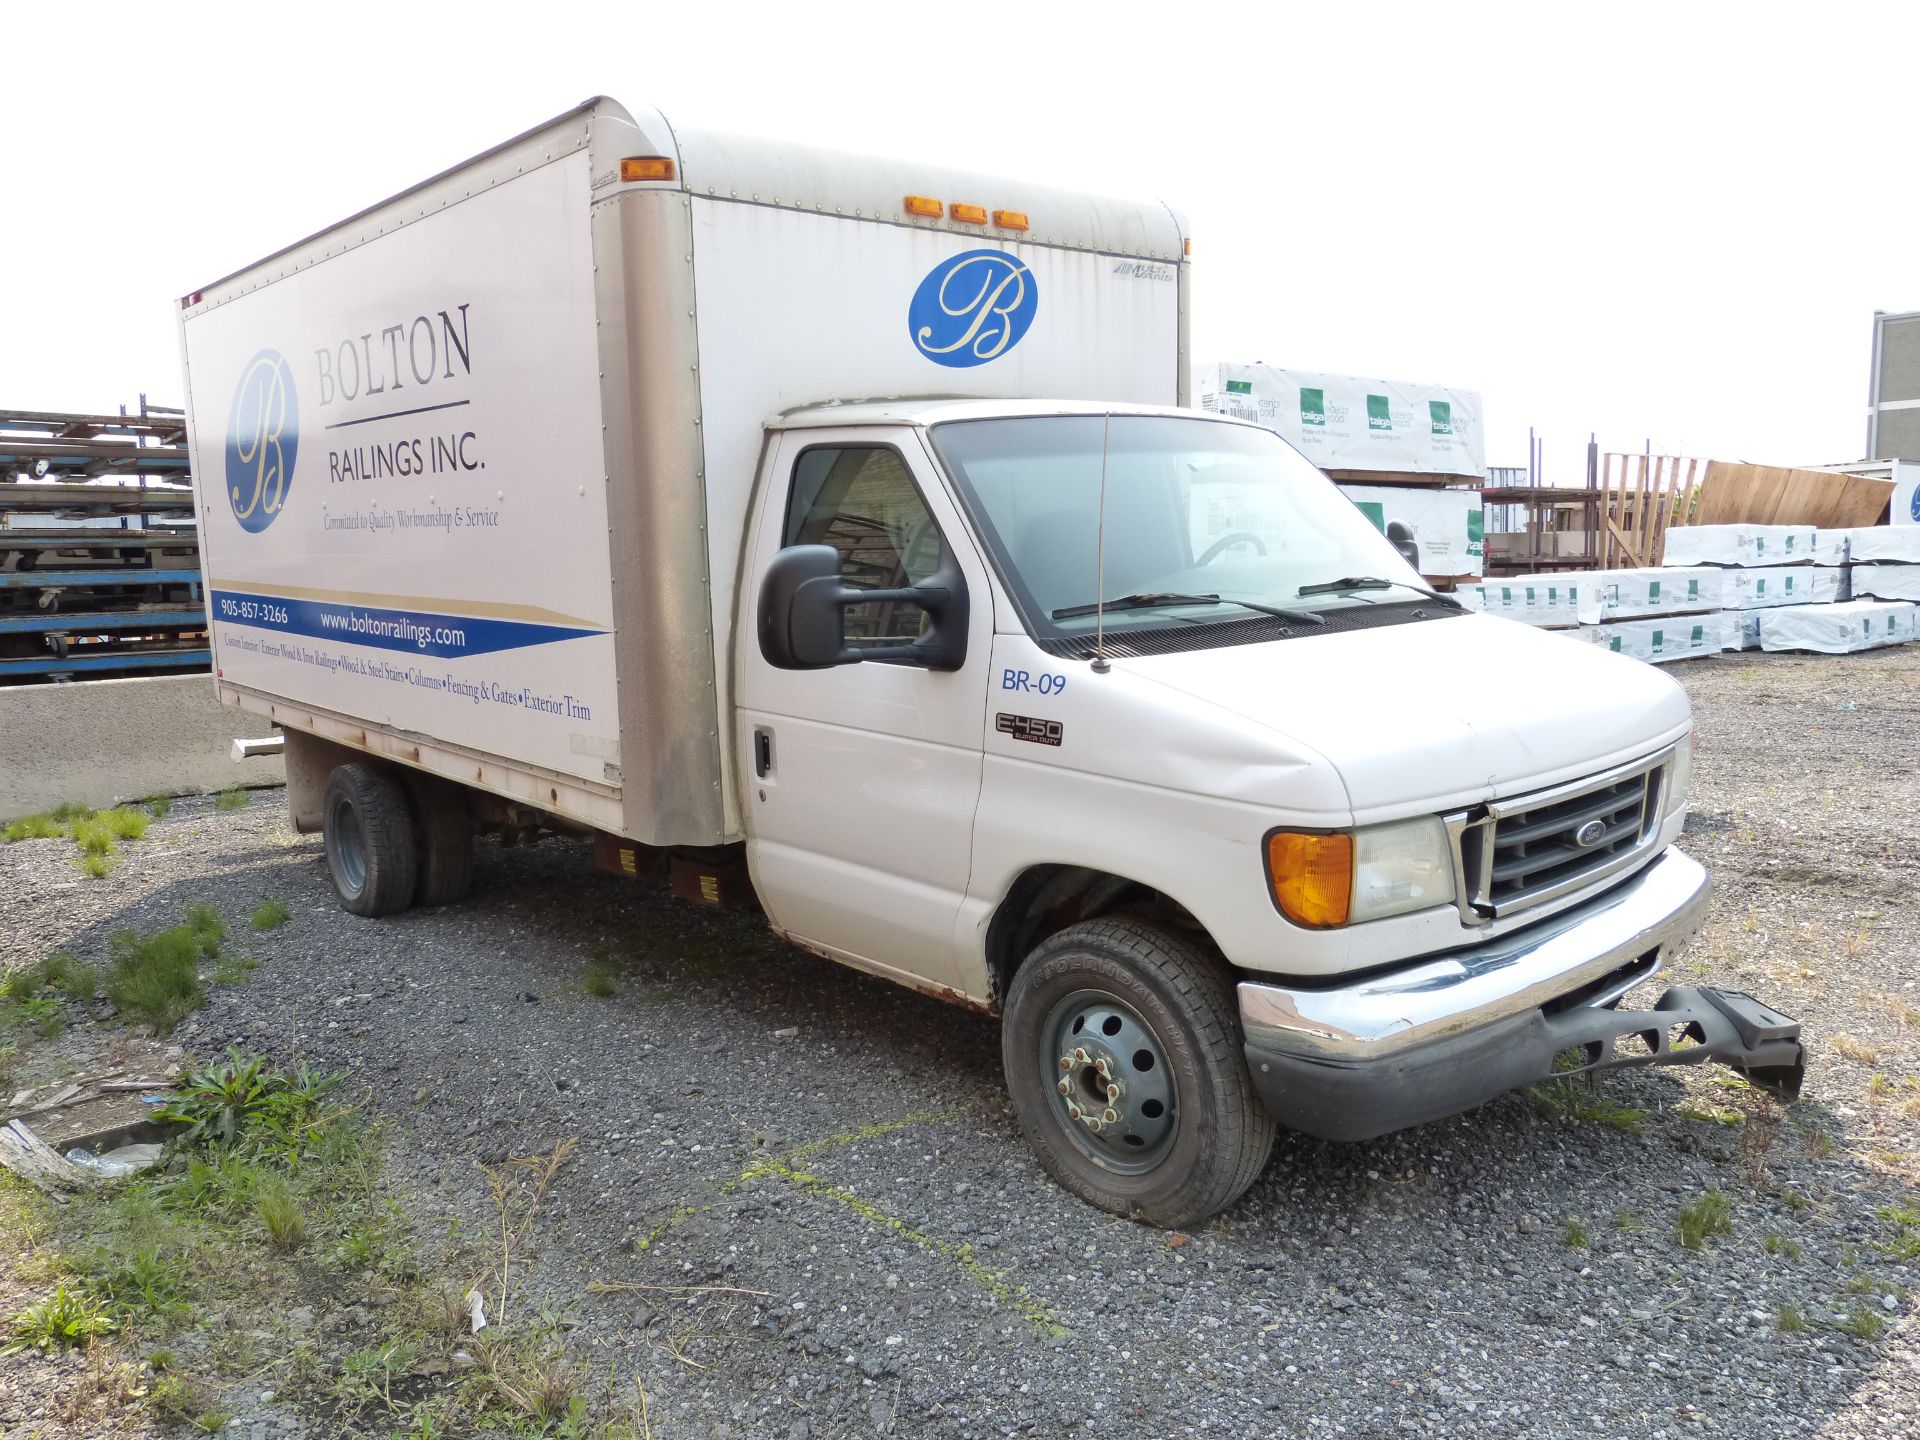 2004 FORD E450 SINGLE UNIT STRAIGHT TRUCK, 16' BOX 6.0 LITRE 8 CYL. DIESEL ENGINE, DUAL REAR WHEELS, - Image 2 of 10